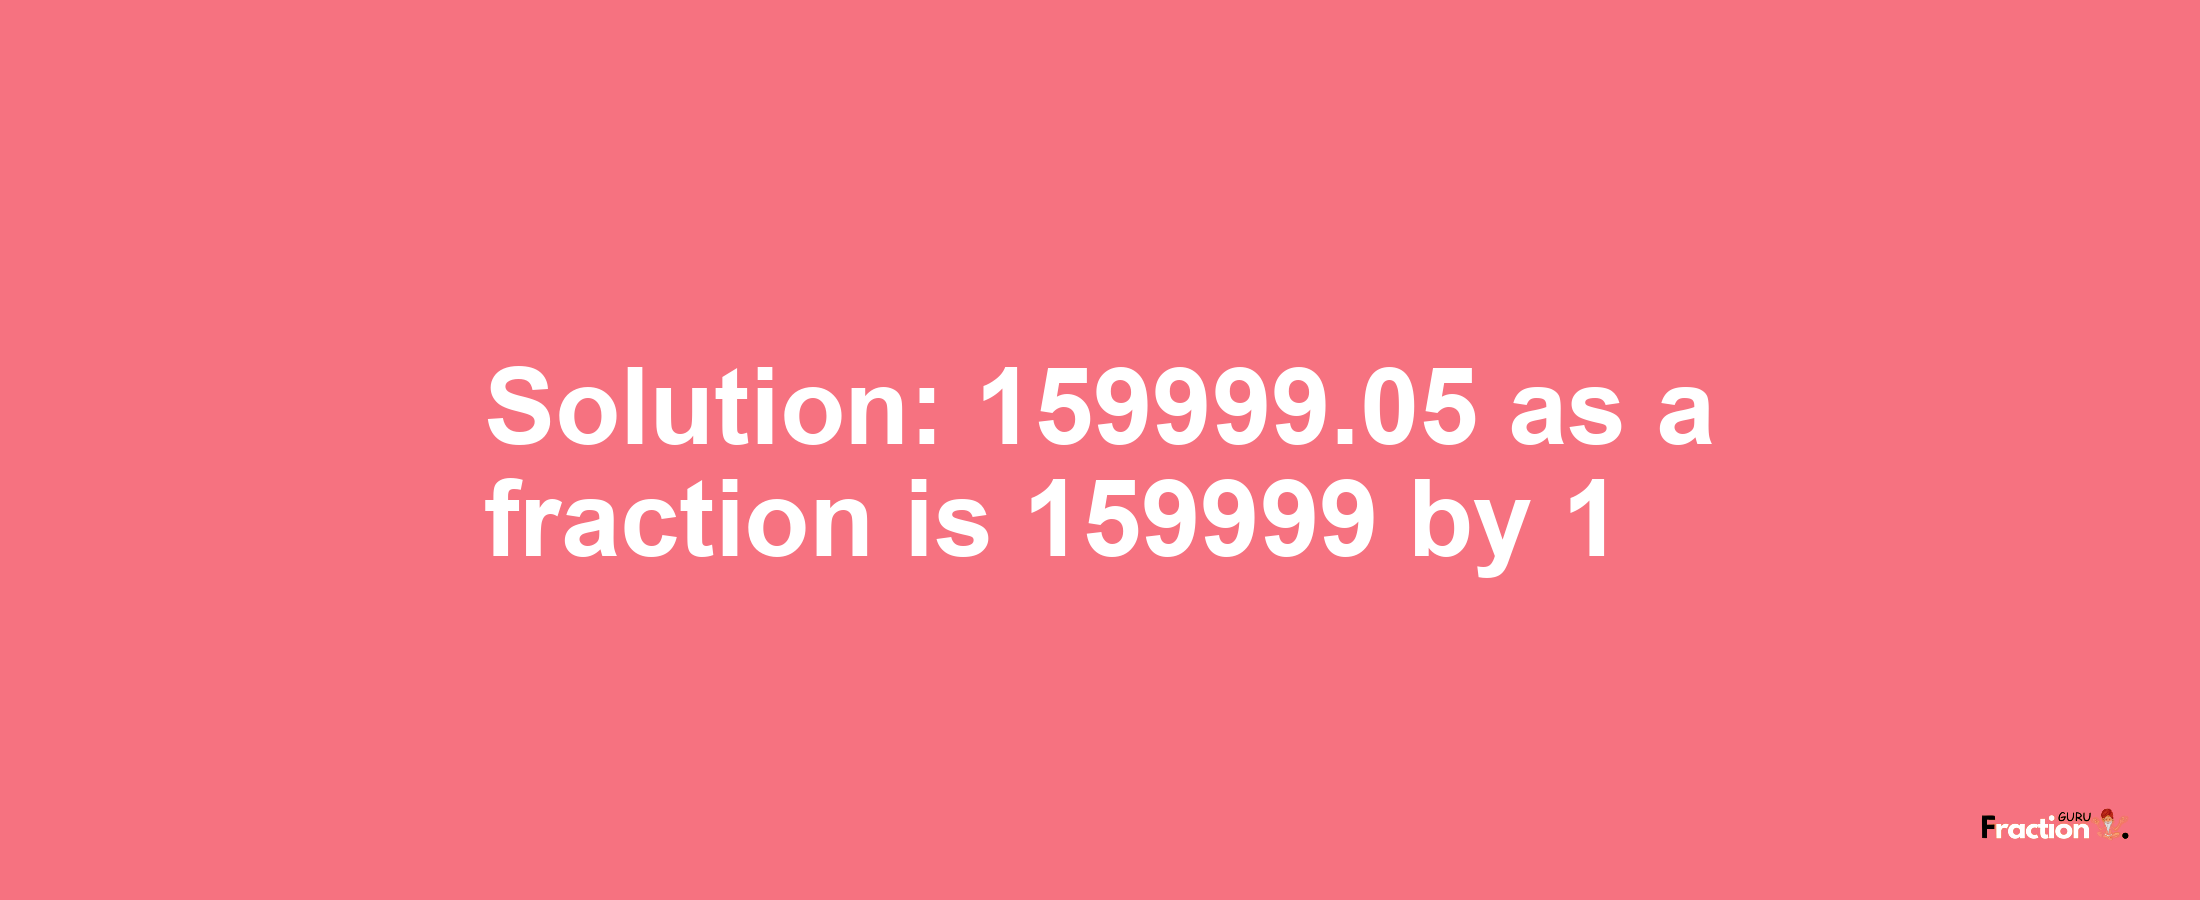 Solution:159999.05 as a fraction is 159999/1